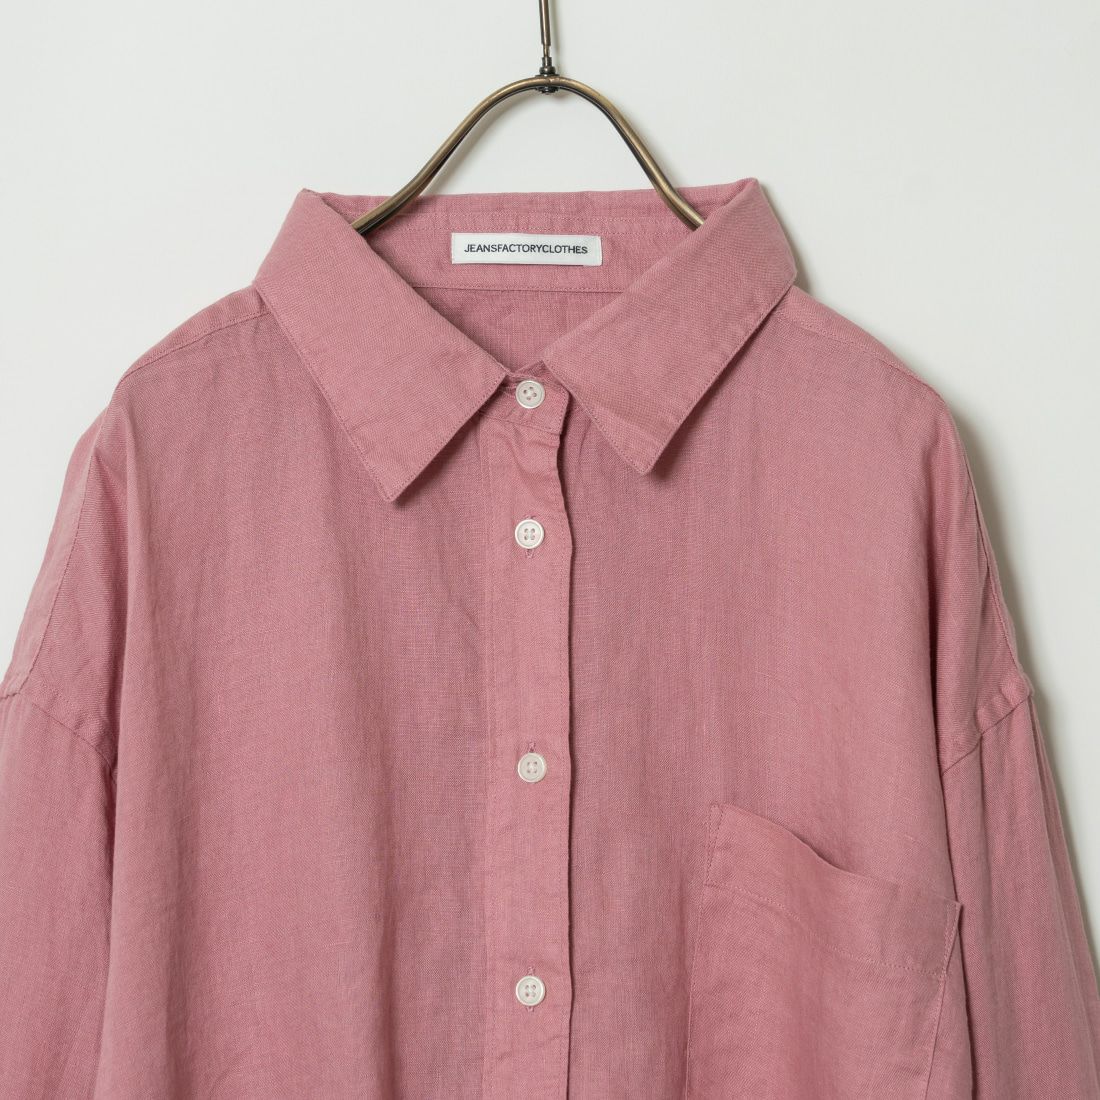 Jeans Factory Clothes [ジーンズファクトリークローズ] ロングスリーブ リネンシャツ [LFE100] 110 PINK